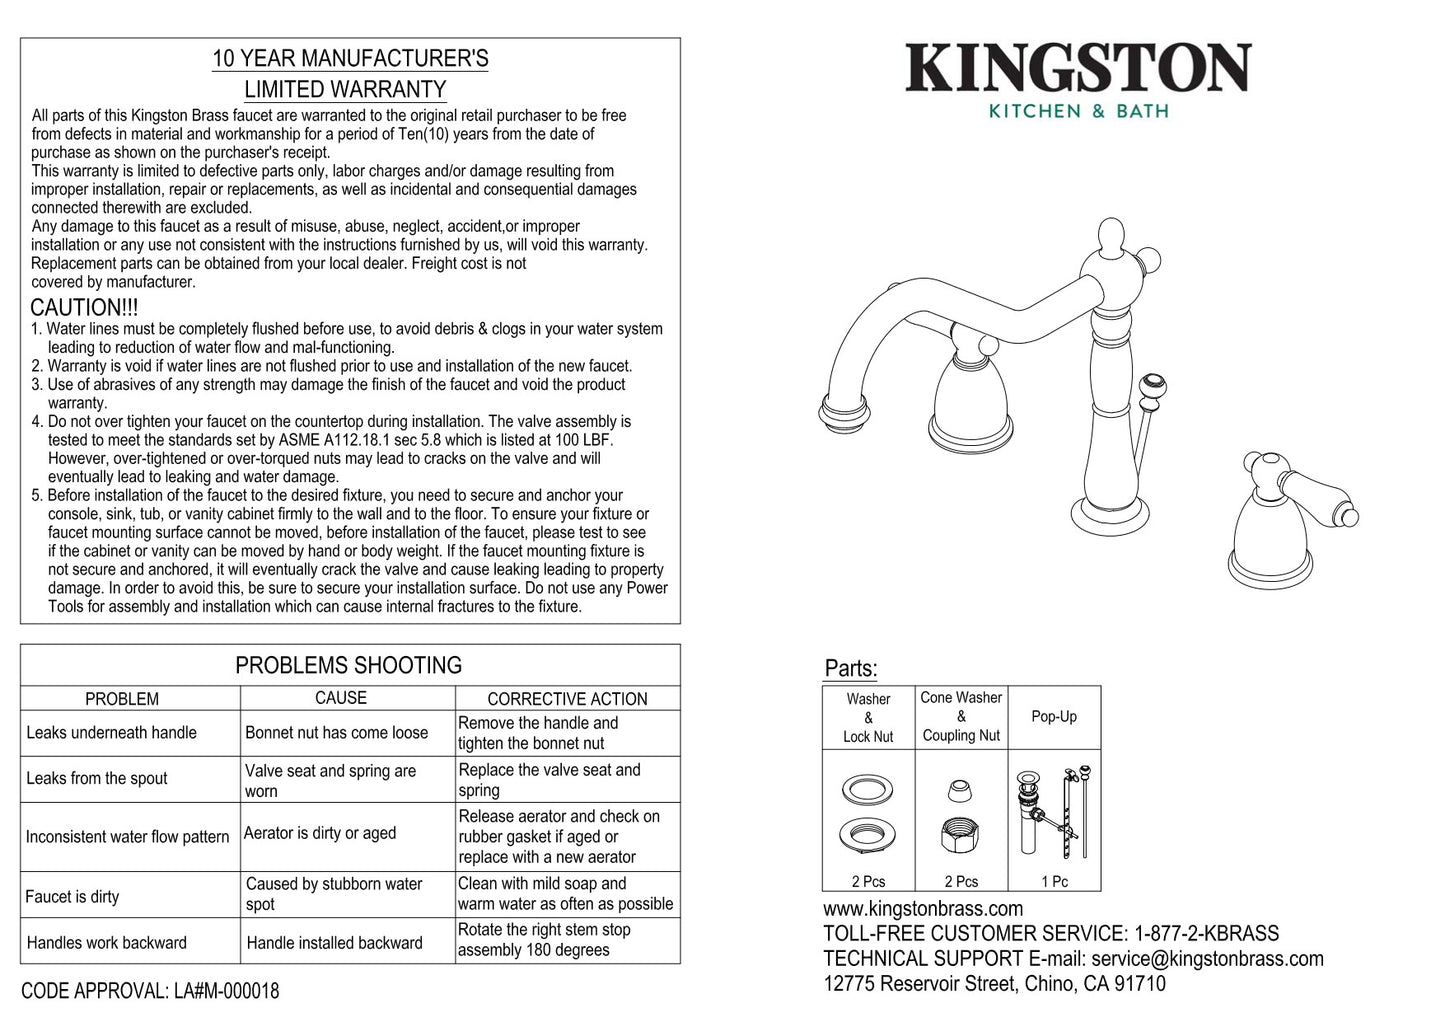 Kingston Brass KB1978PL Heritage Widespread Bathroom Faucet with Plastic Pop-Up